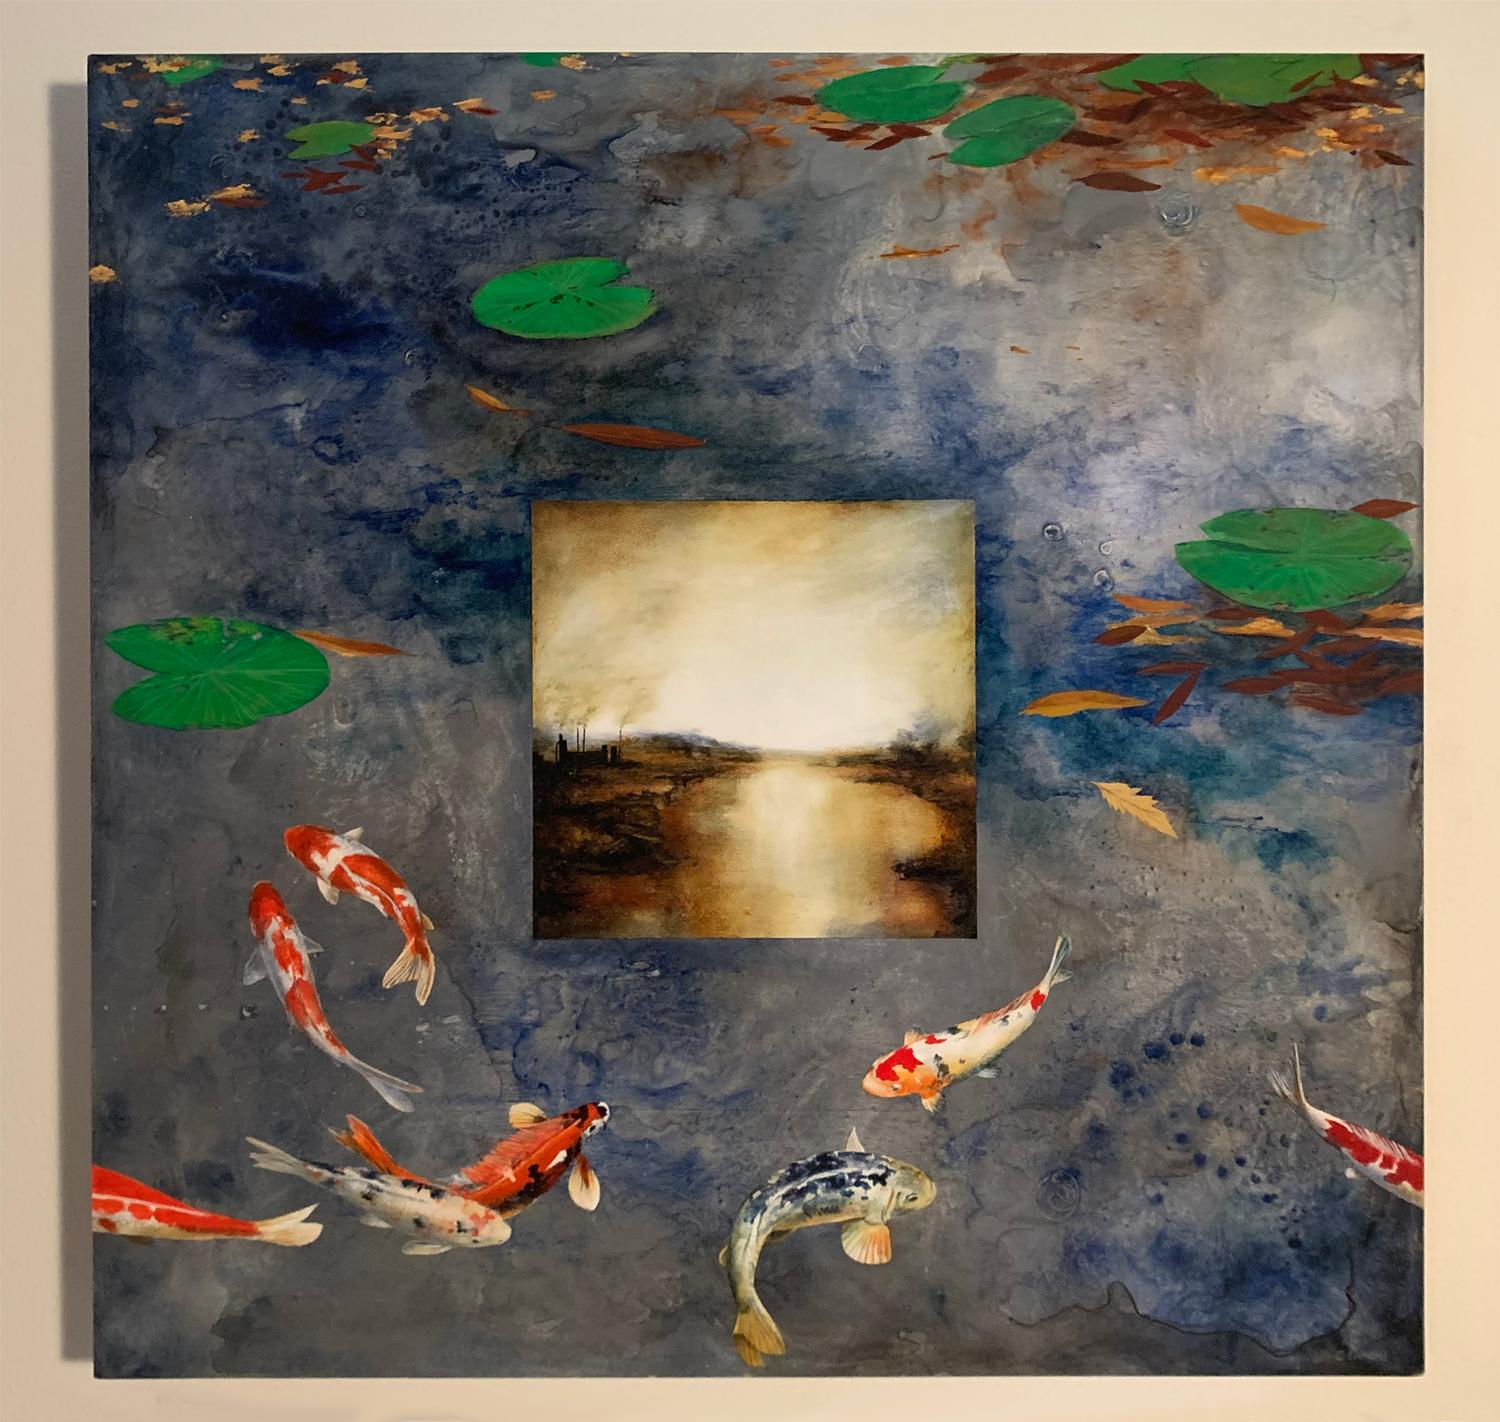 <p>Artist Comments<br />A surreal painting within a painting. In the middle of a peaceful koi pond appears a window to a soft autumn landscape. 